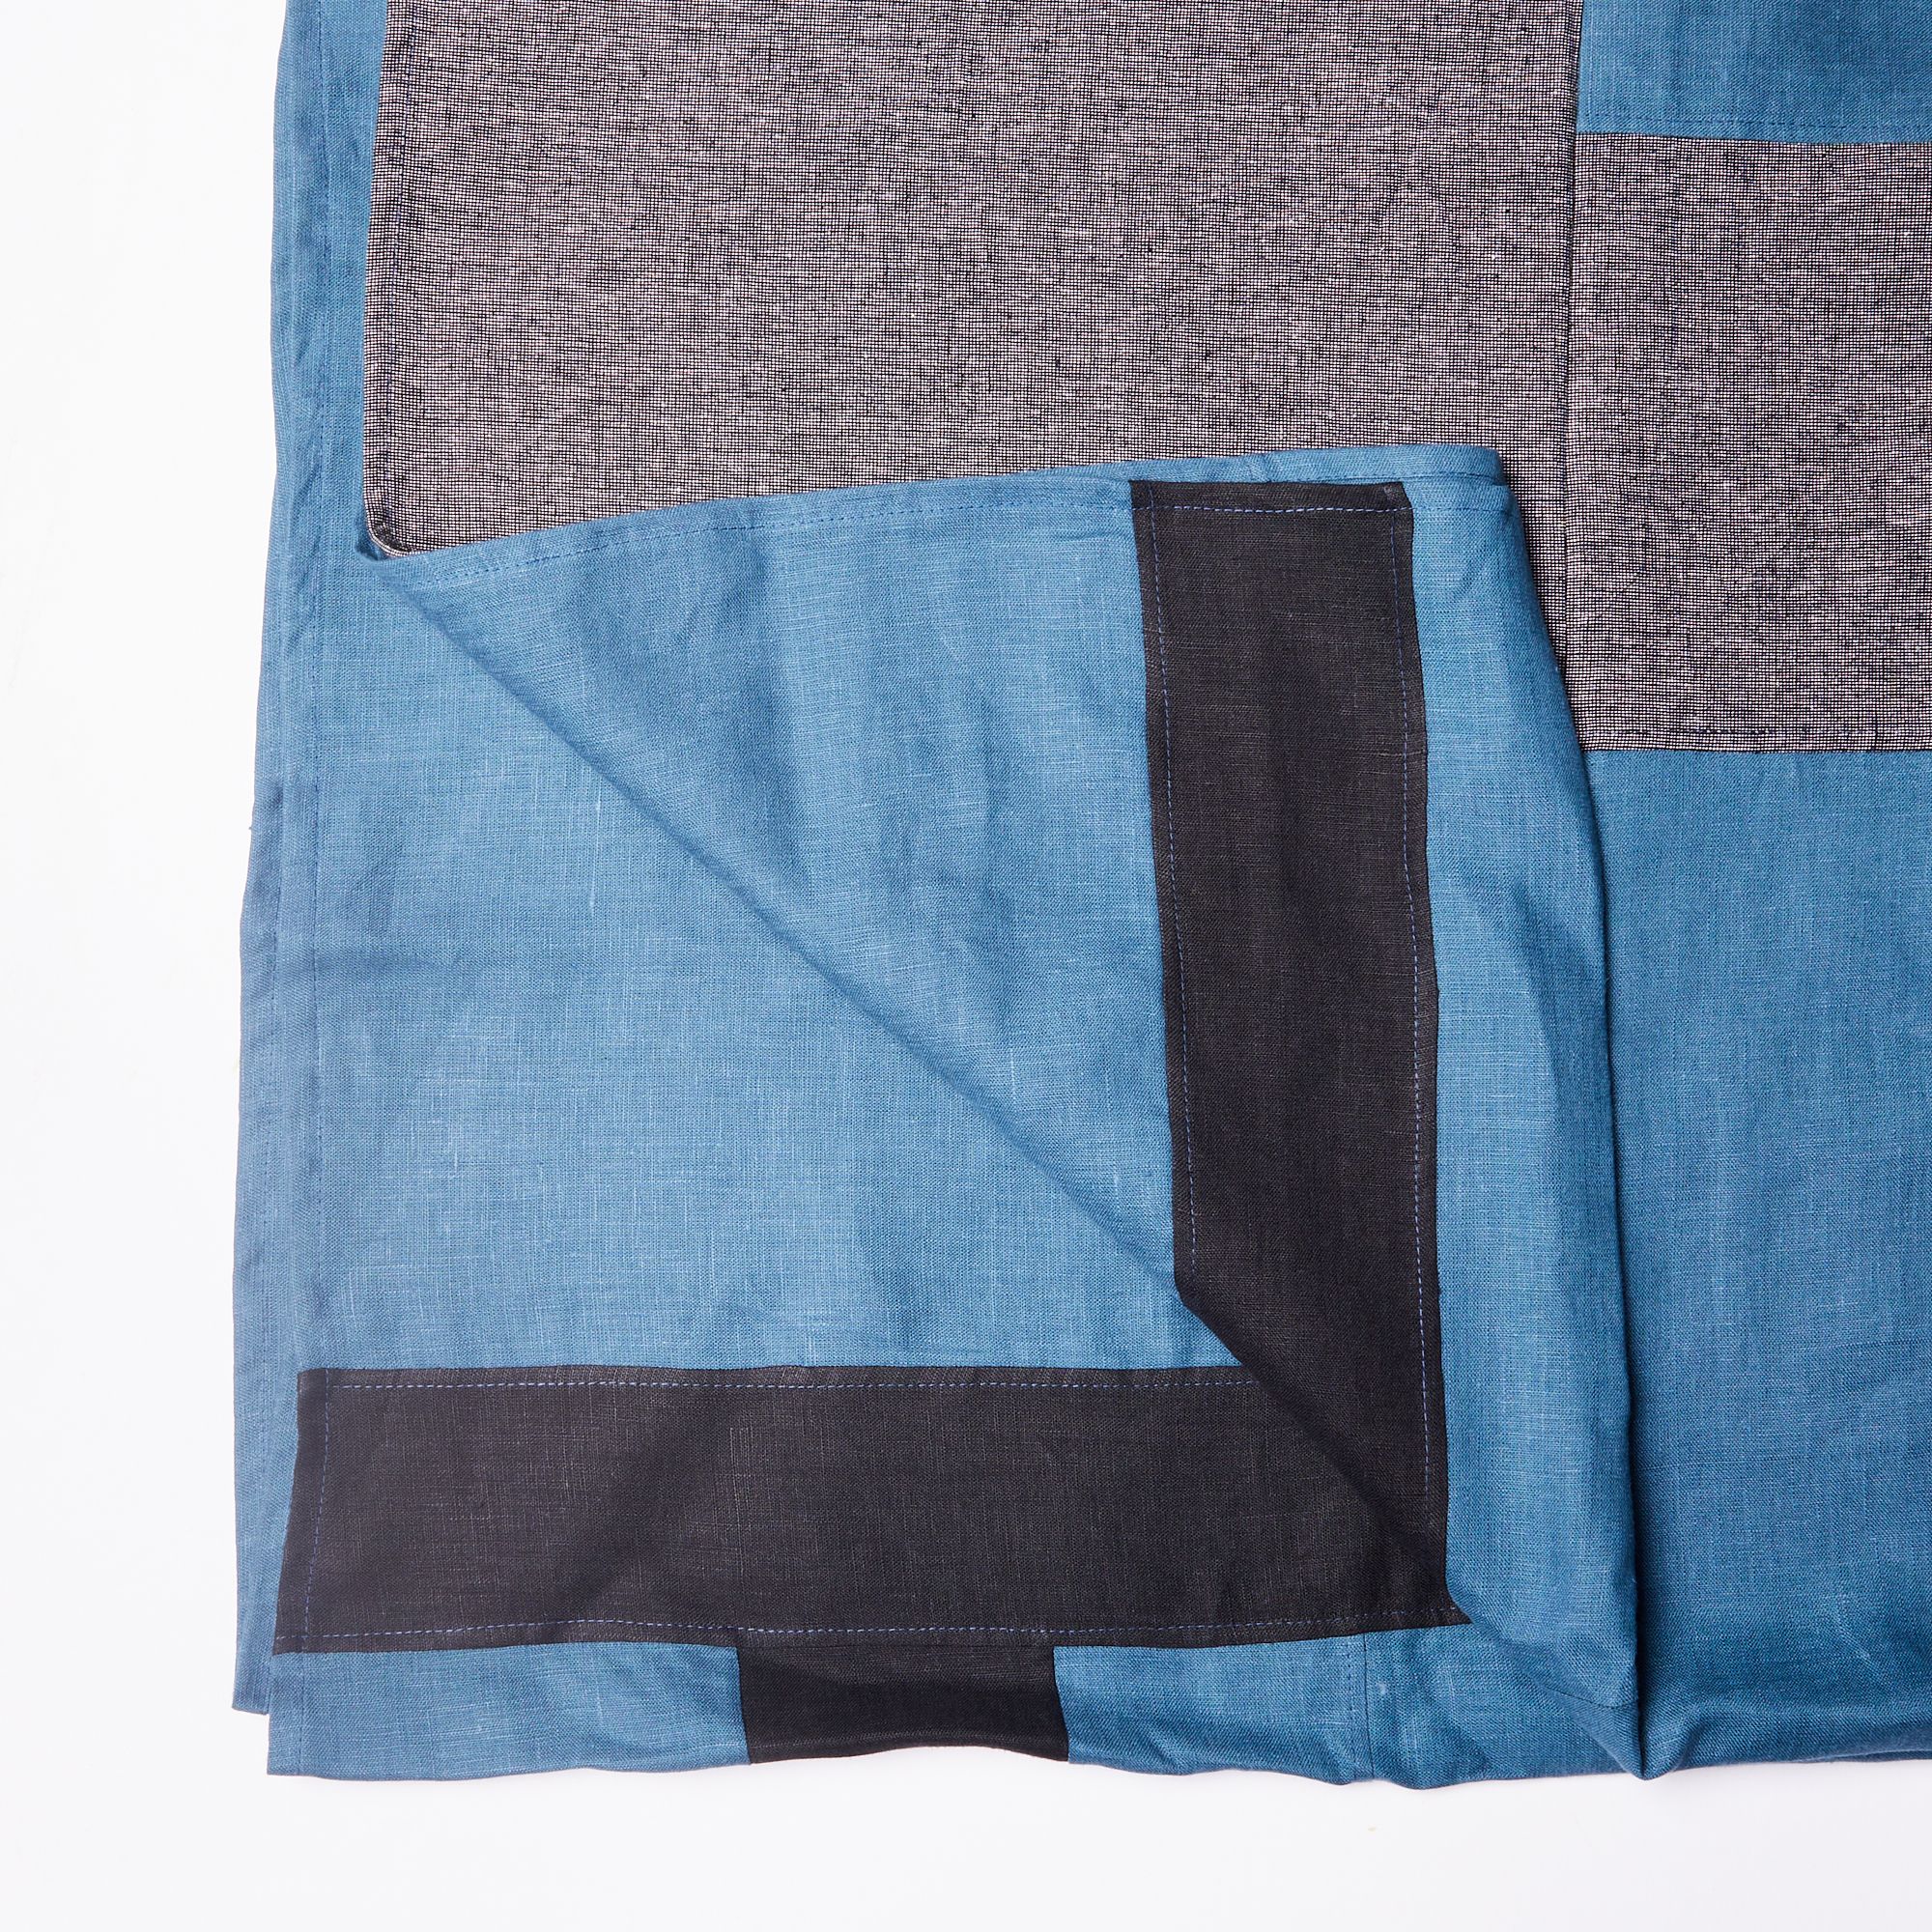 Corner of tablecloth with grey, blue, charcoal rectangular shapes